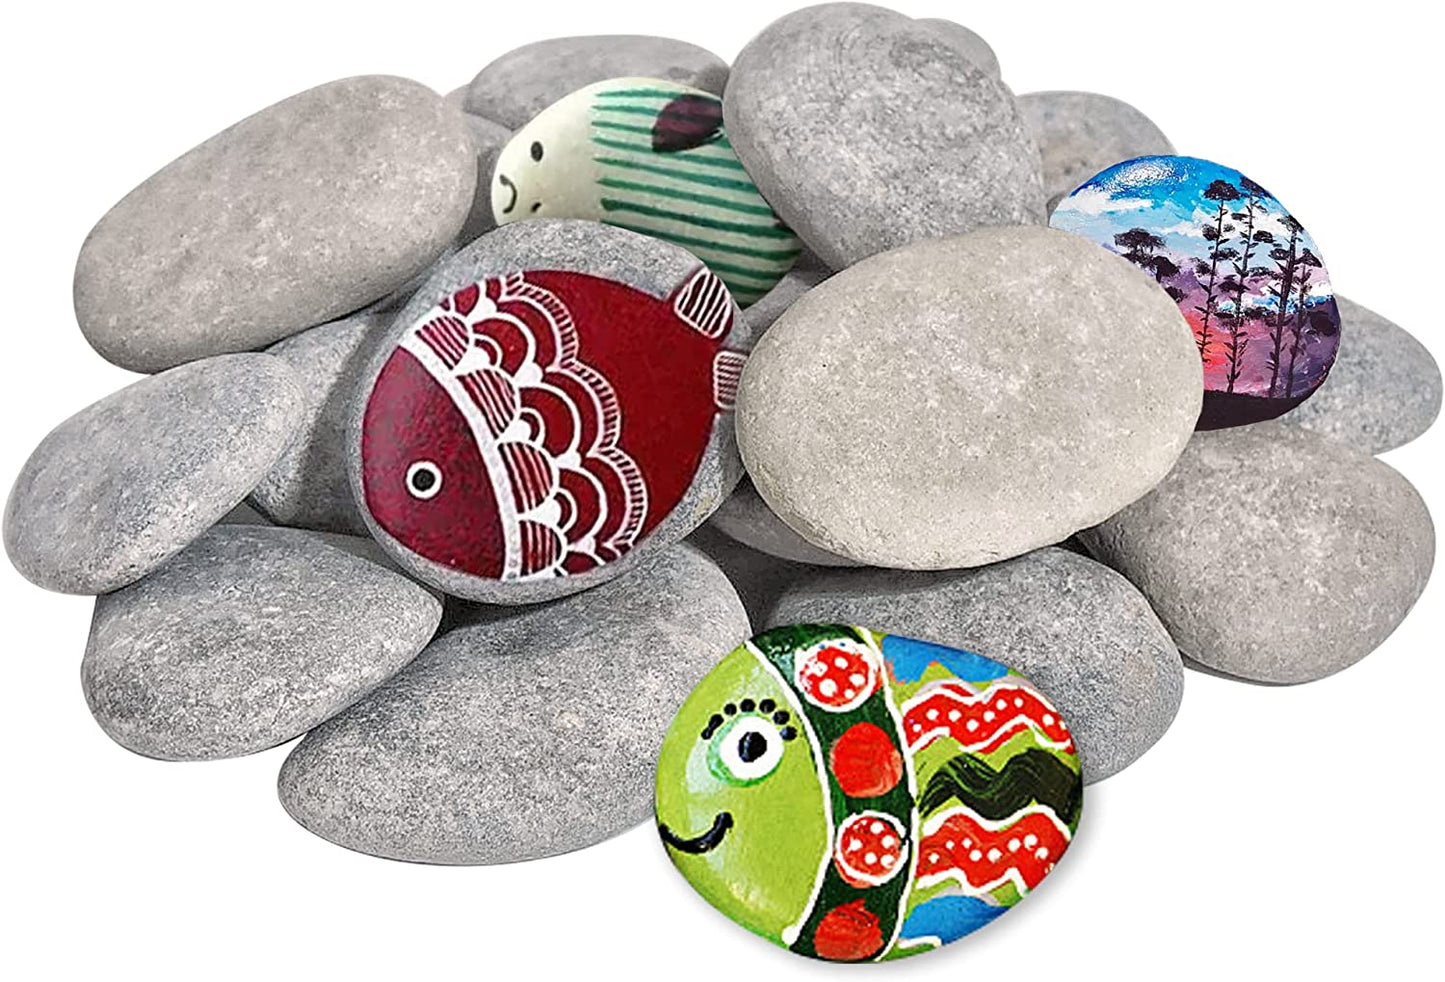 15PCS Large Painting Rocks, Natural River Rocks, Flat Rocks for Painting, 2-3 Inches Stones for Arts & Crafting